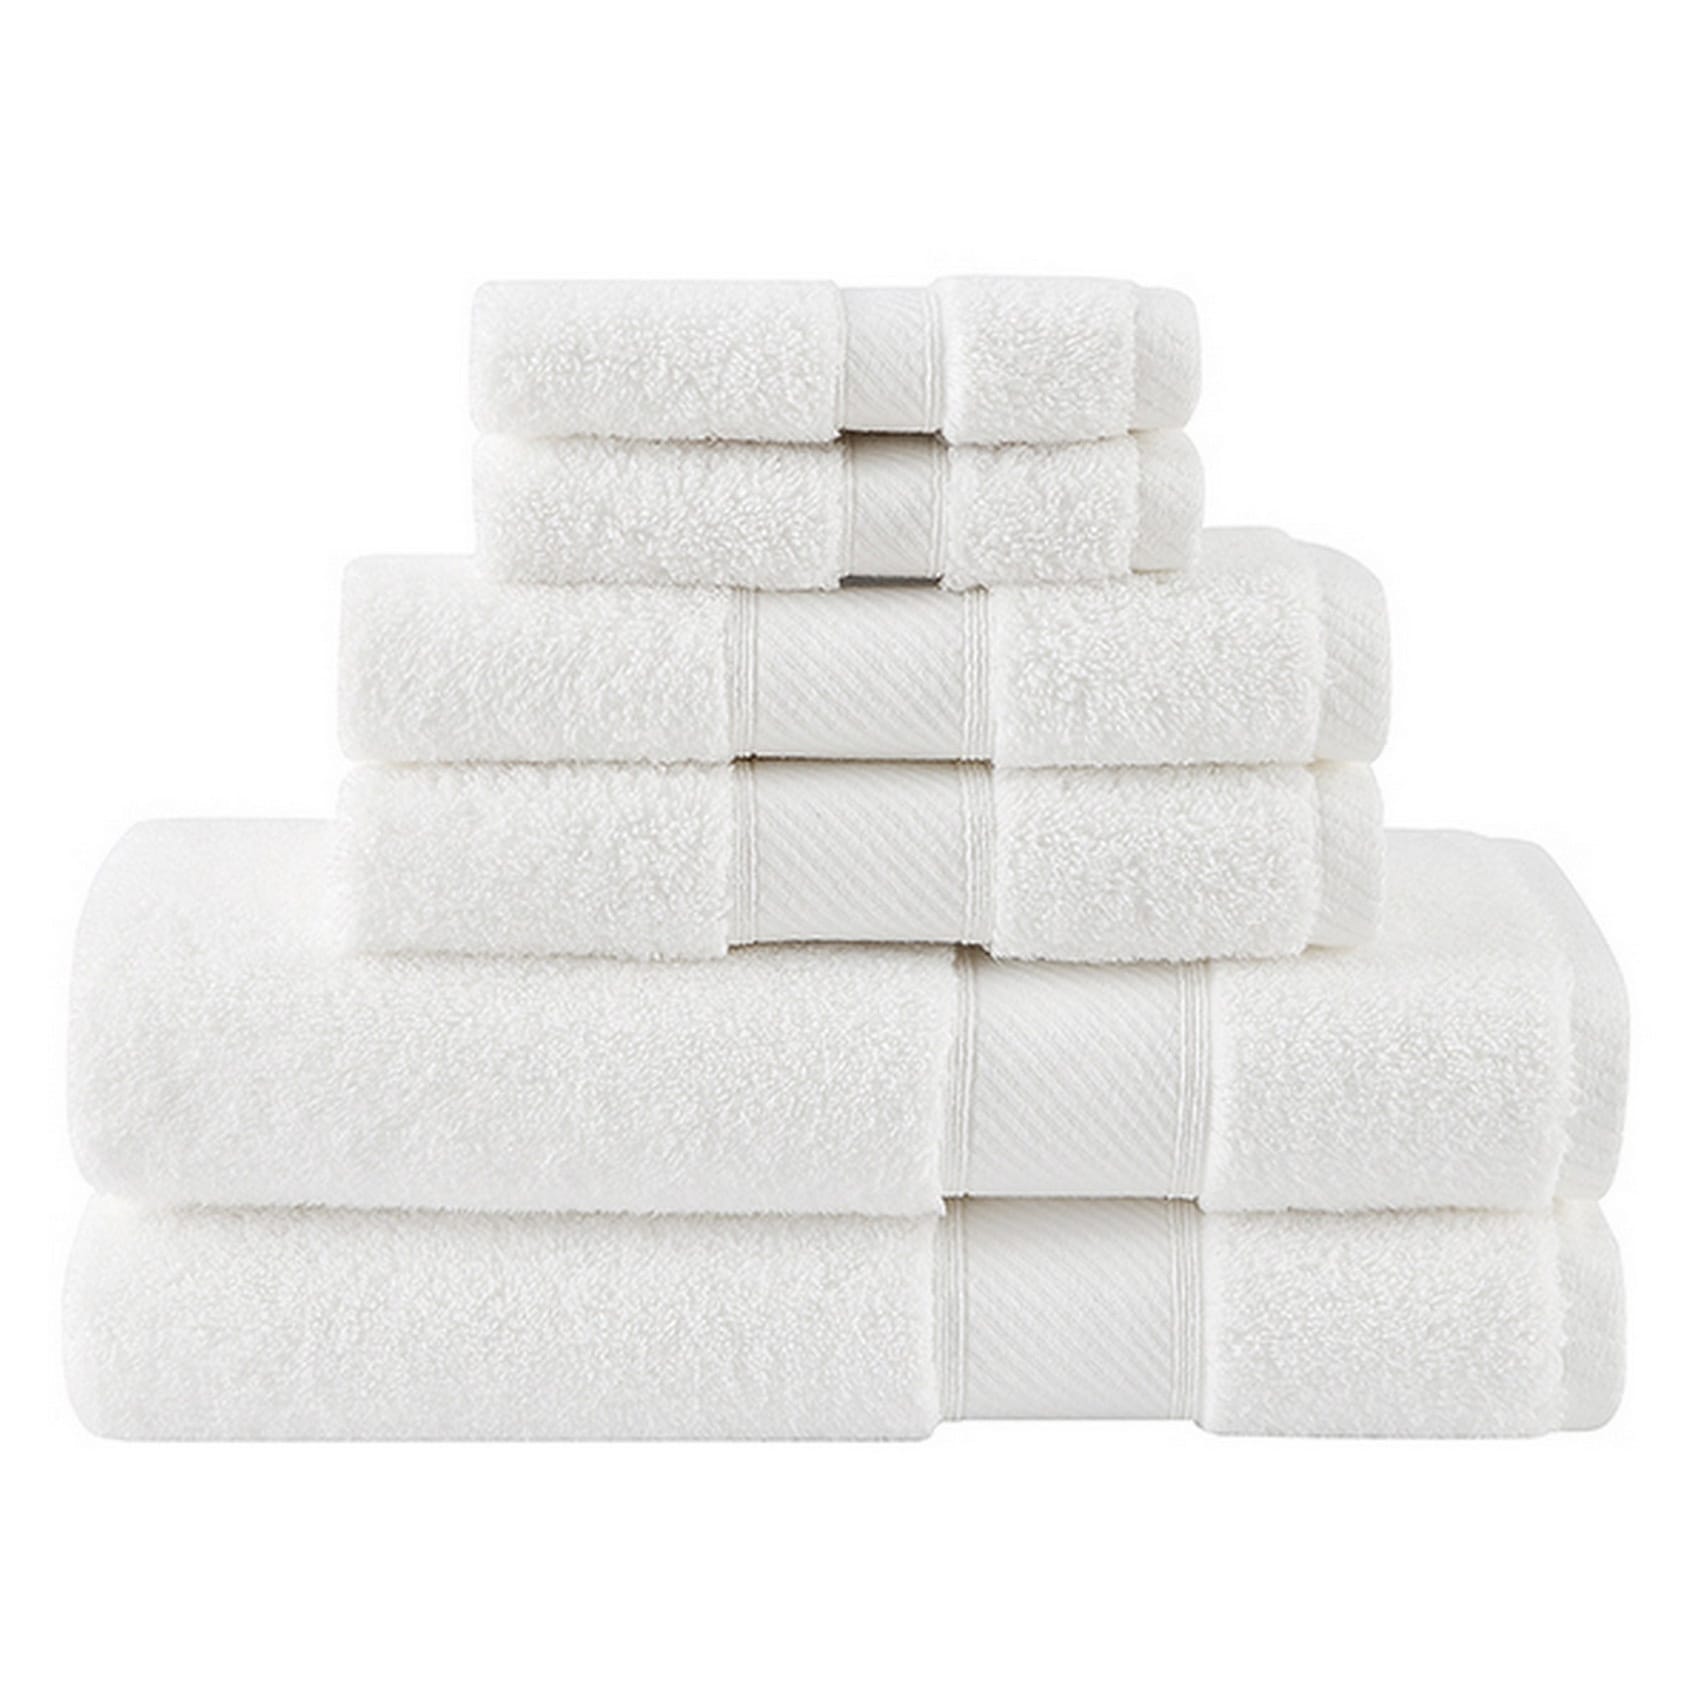 Towel and Linen Mart White Towel Sets 2 Bath Towels 2 Hand Towels and 4  Washclot